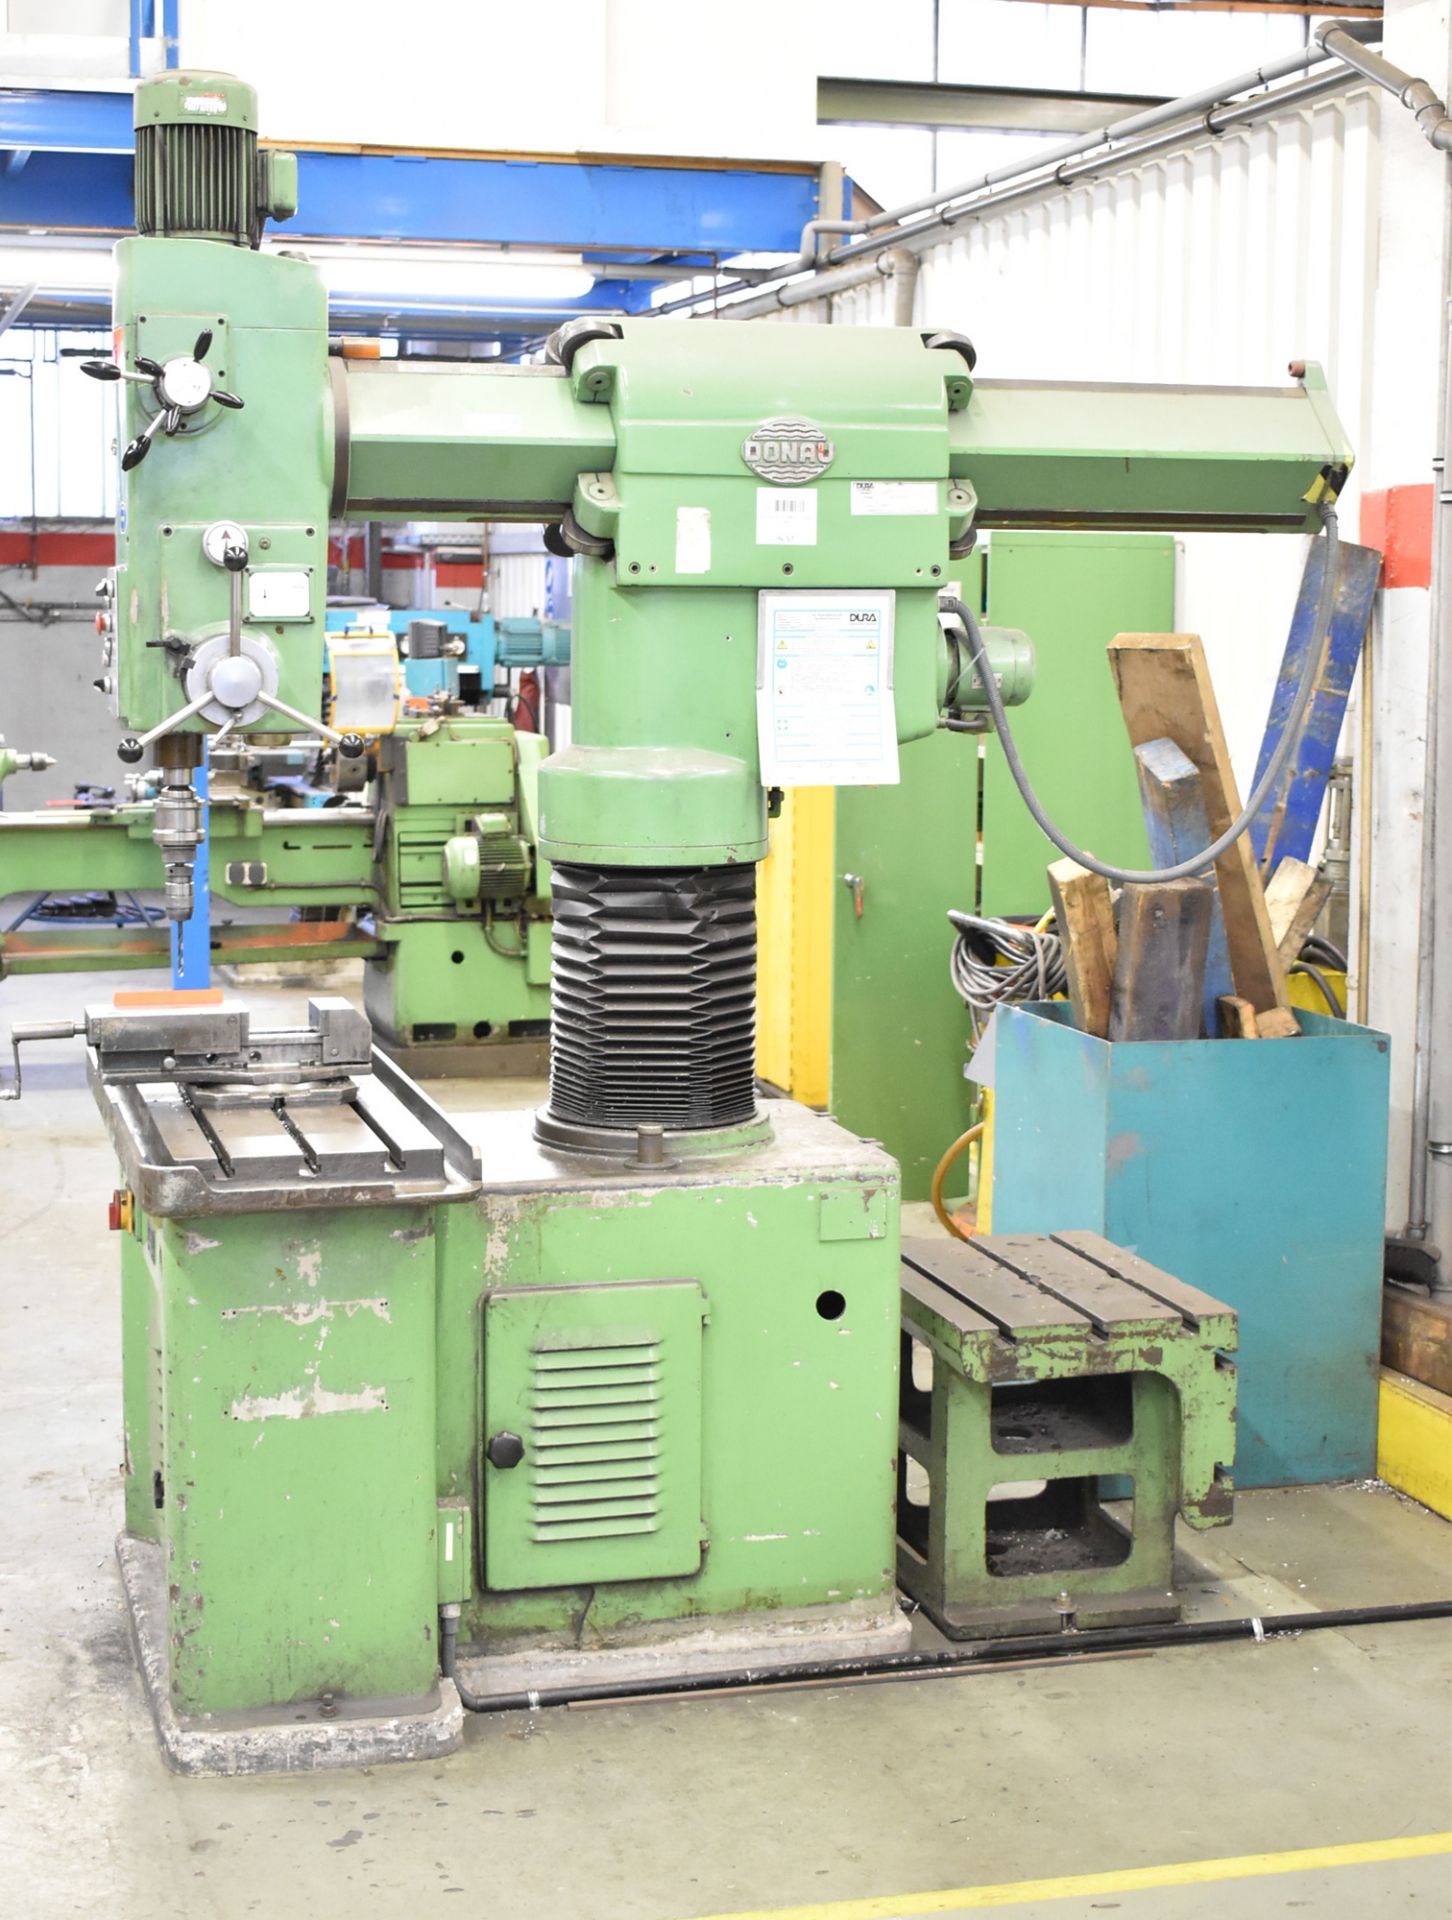 DONAU DR32 RADIAL ARM DRILL WITH 1700 MM ARM, 1005 MM X 400 MM TABLE, SPEEDS TO 1800 PRM, 650 MM X - Image 2 of 6